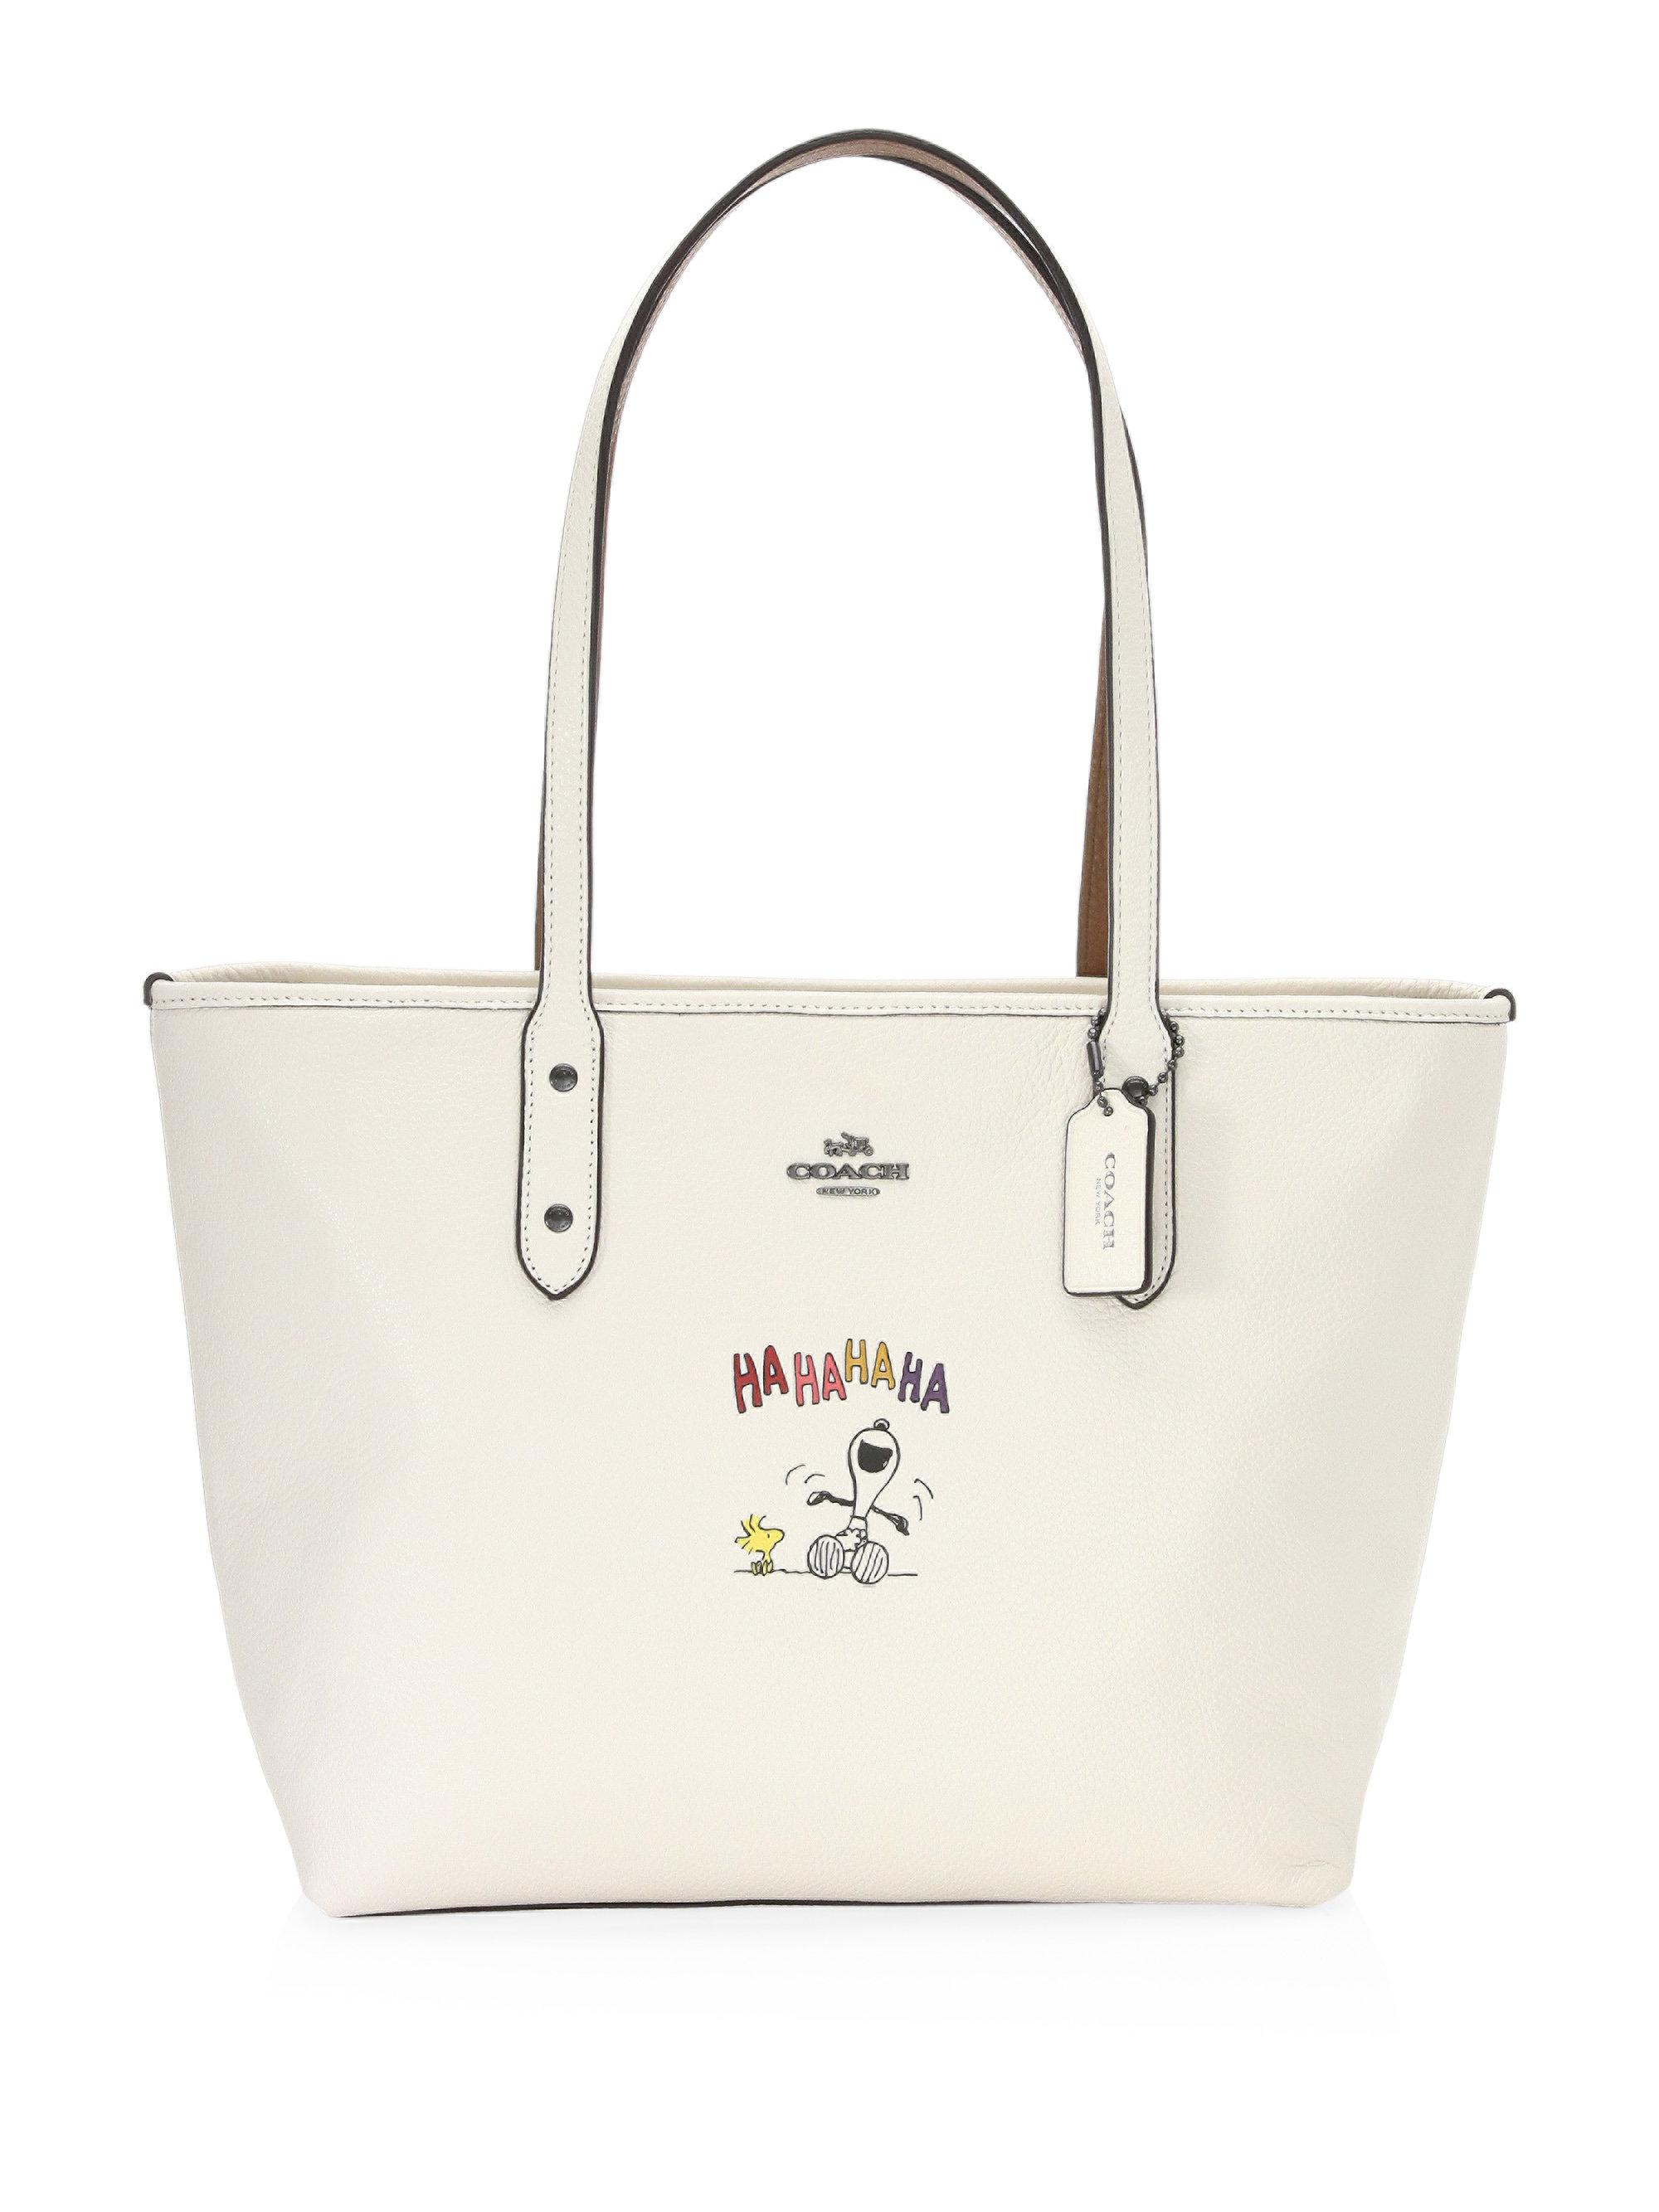 COACH X Peanuts Snoopy Leather Shoulder Bag in Natural | Lyst